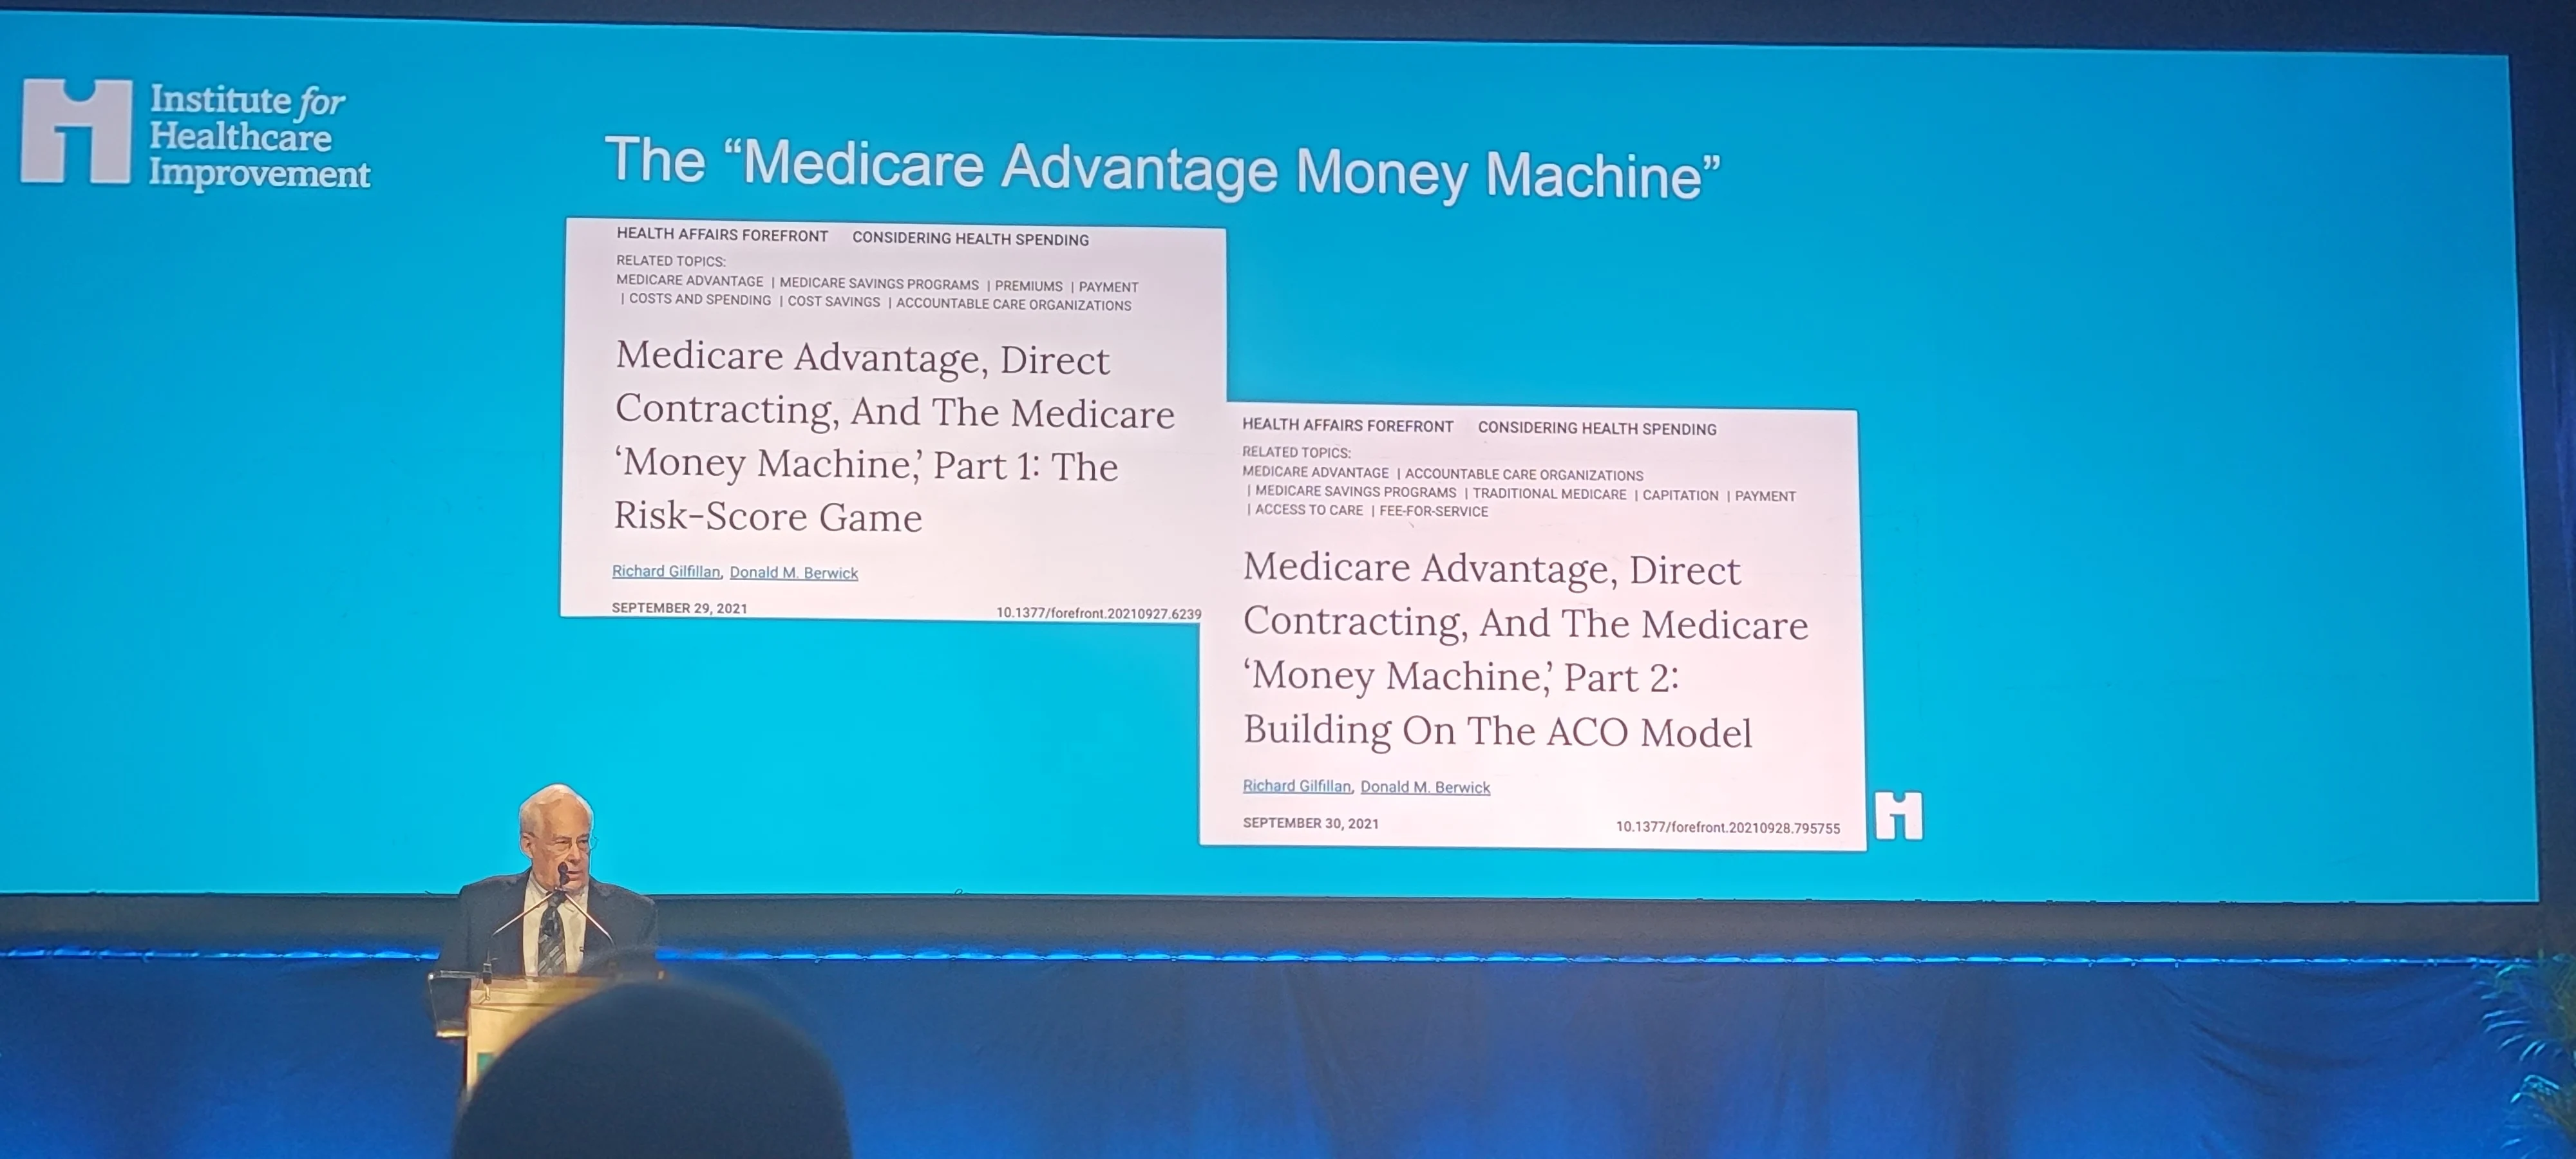 IHI Forum: Don Berwick calls out greed, rallies industry to protest monetization of healthcare